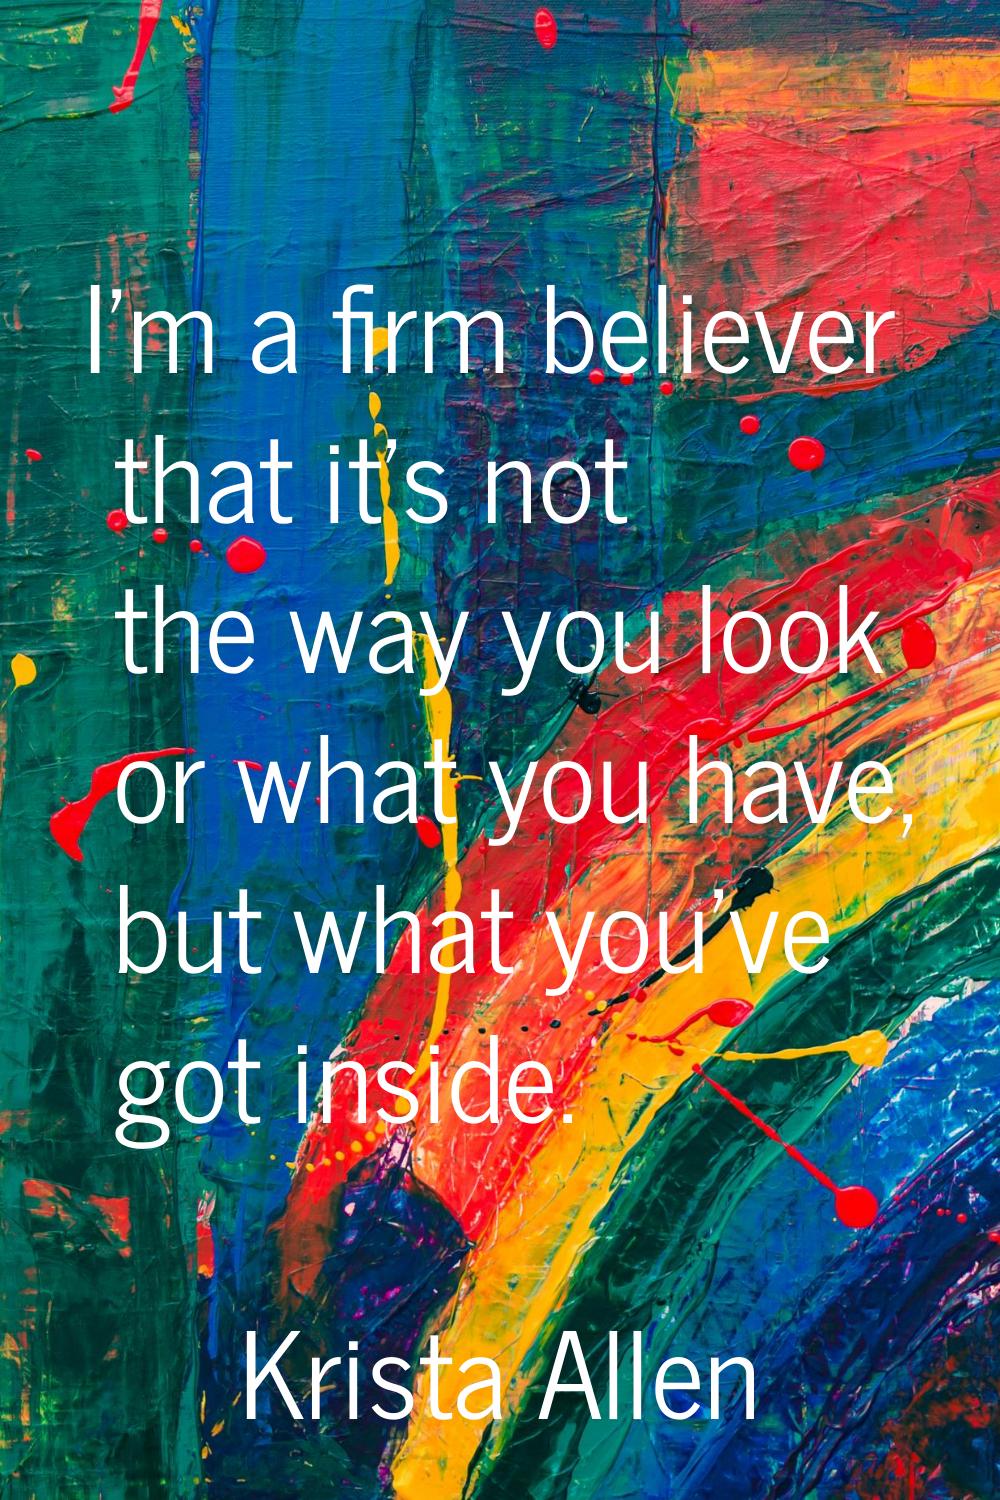 I'm a firm believer that it's not the way you look or what you have, but what you've got inside.